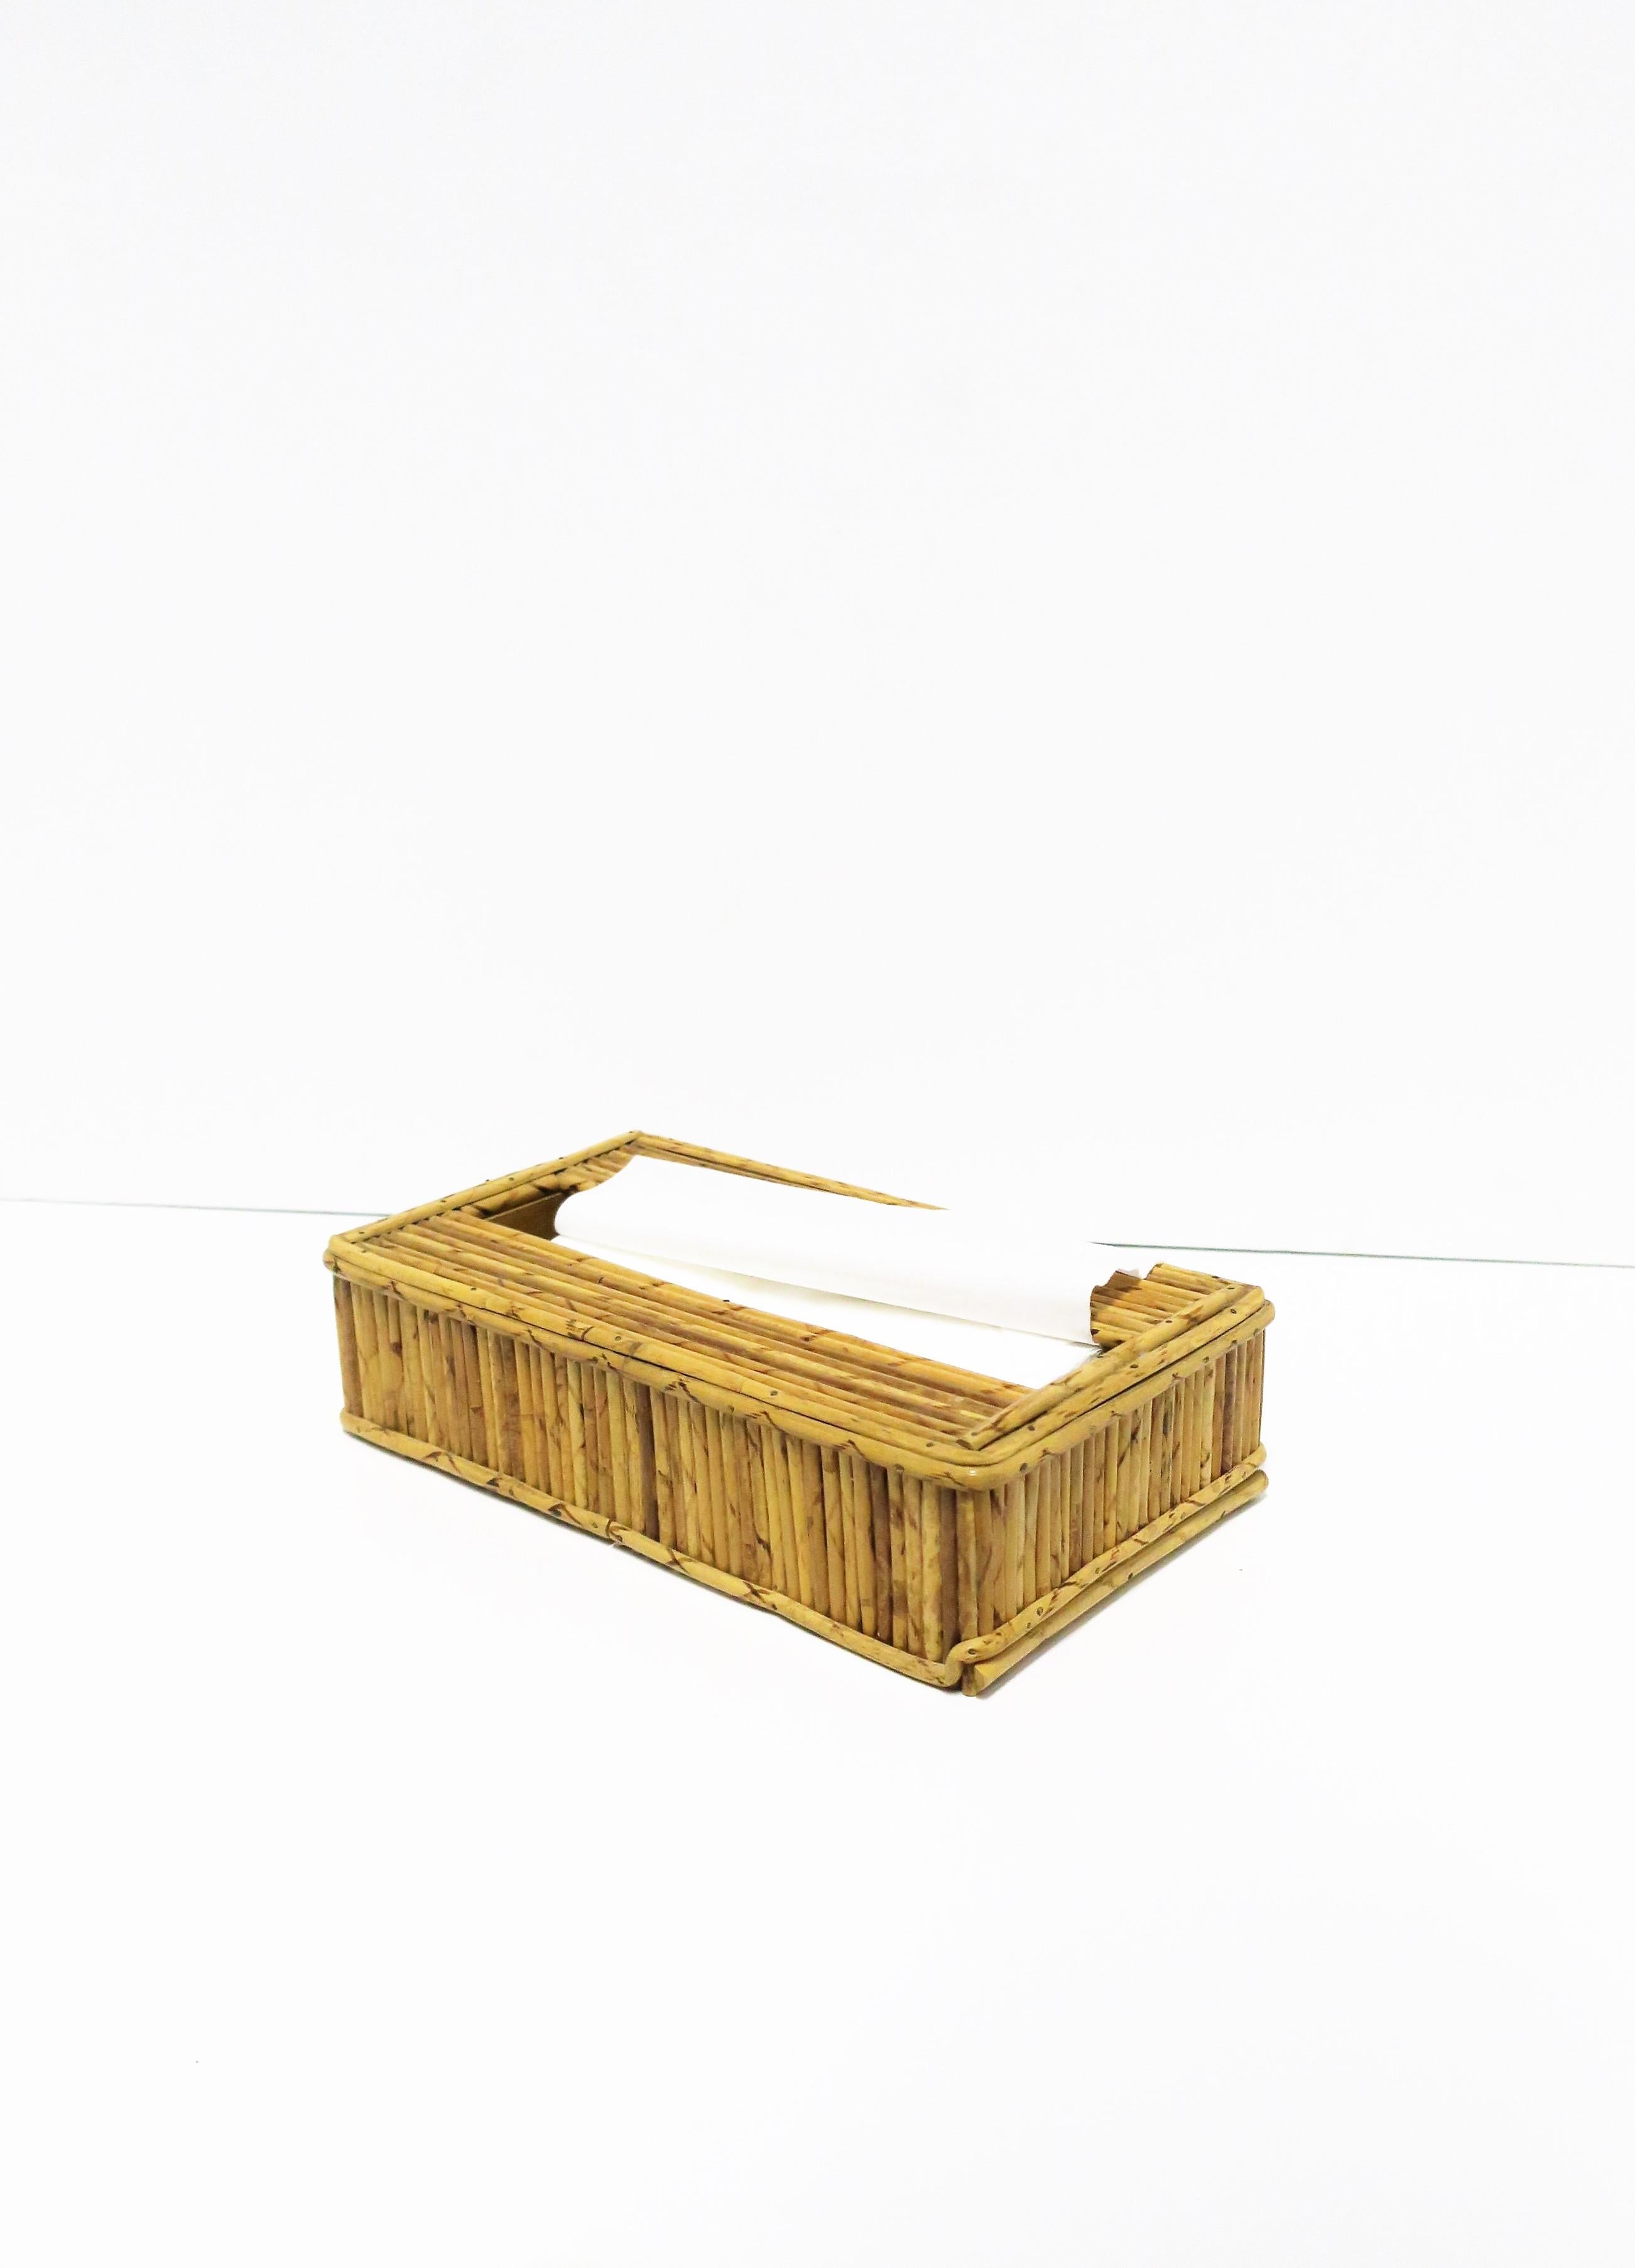 Hong Kong Wicker Tissue Box Cover Holder in the Crespi Style For Sale